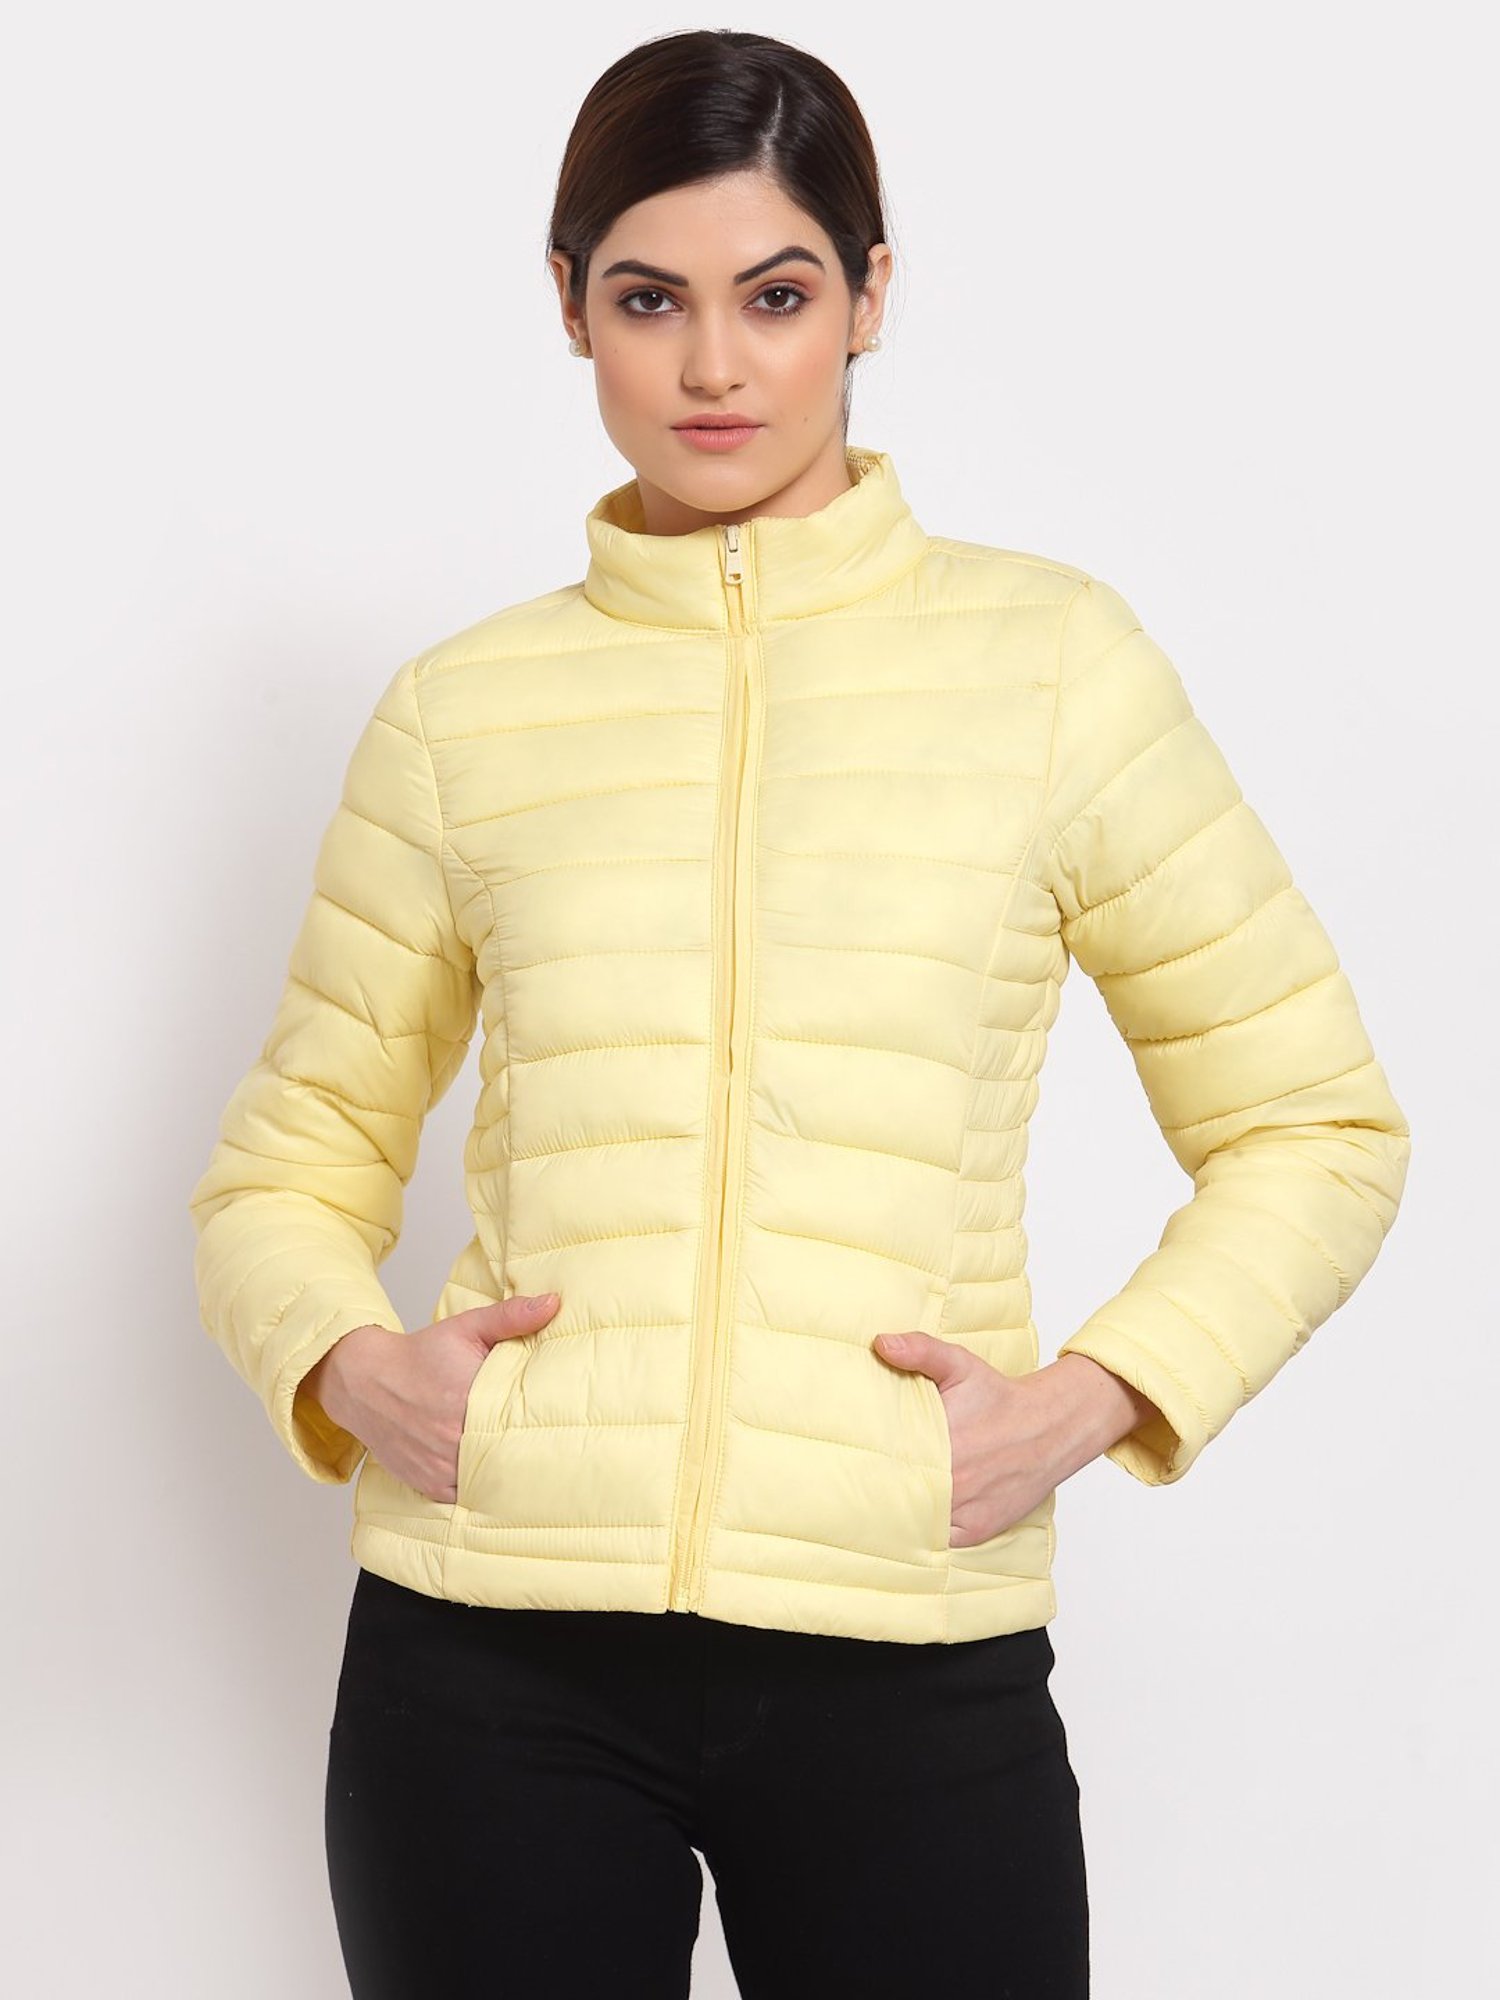 Down Jacket Women Long Waterproof Hooded Warm Down Puffer Coats Jackets  Parka with Removable Faux Fur Hood Yellow at Amazon Women's Clothing store